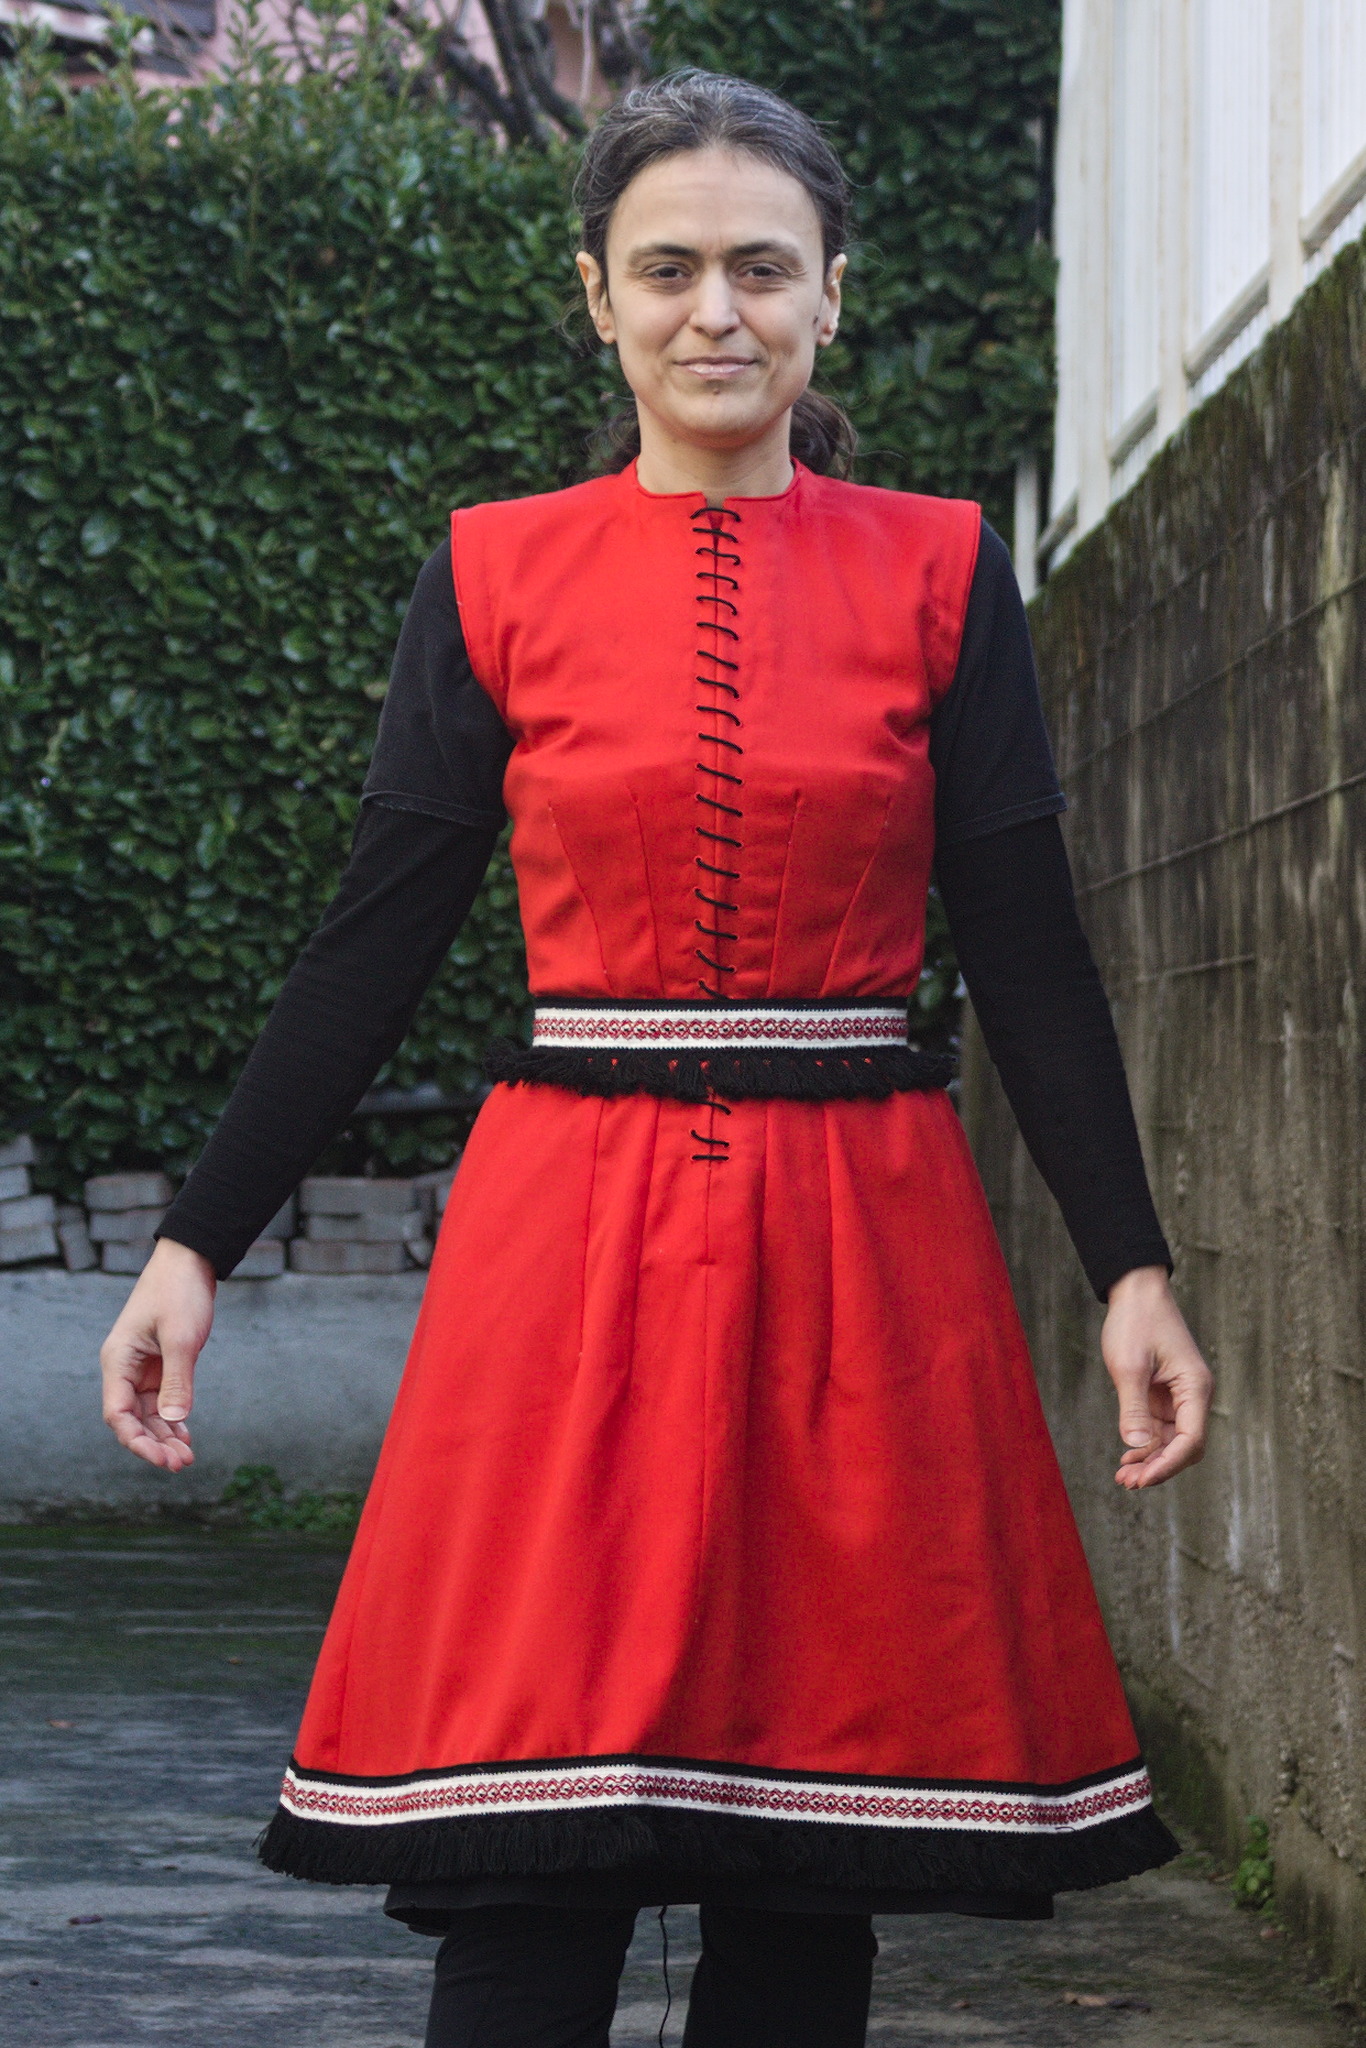 A woman wearing a red sleeveless dress; from the waist up it is
fitted, while the skirt flares out.
There is a white border with red embroidery and black fringe at
the hem and a belt of the same material at the waist.